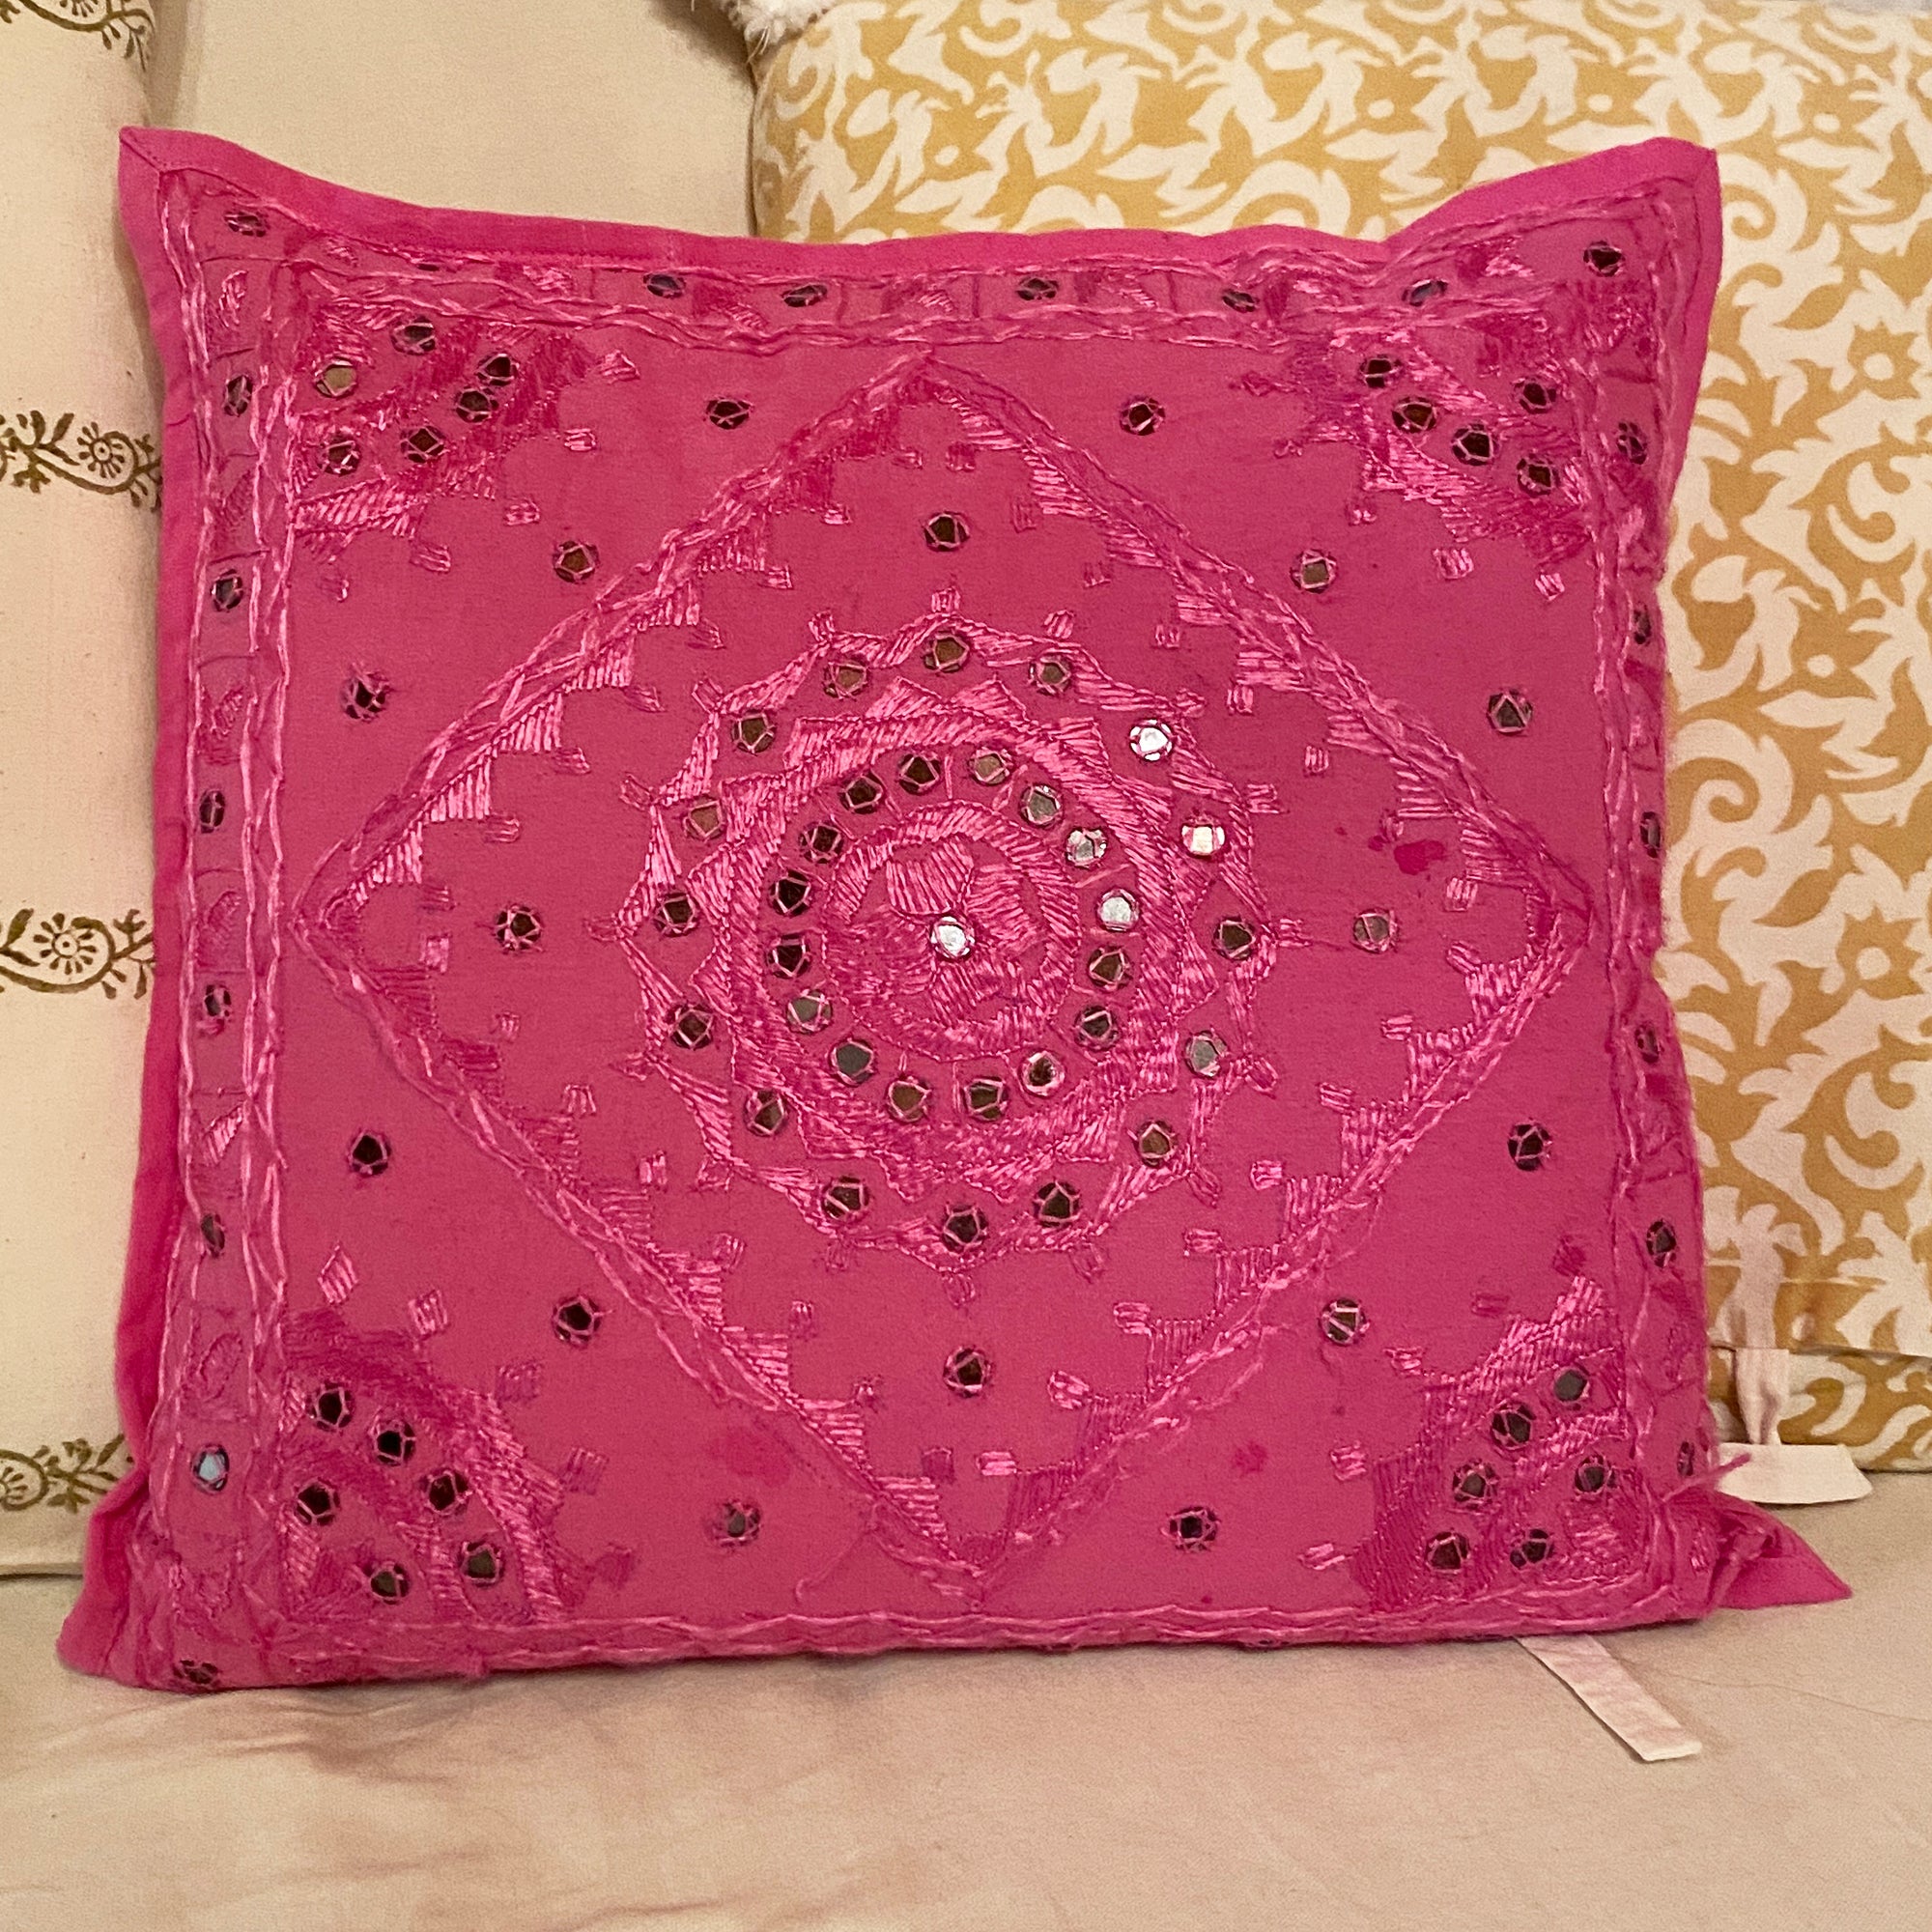 JM Mirrorwork Pillow Covers-7 Colors - Vintage India NYC